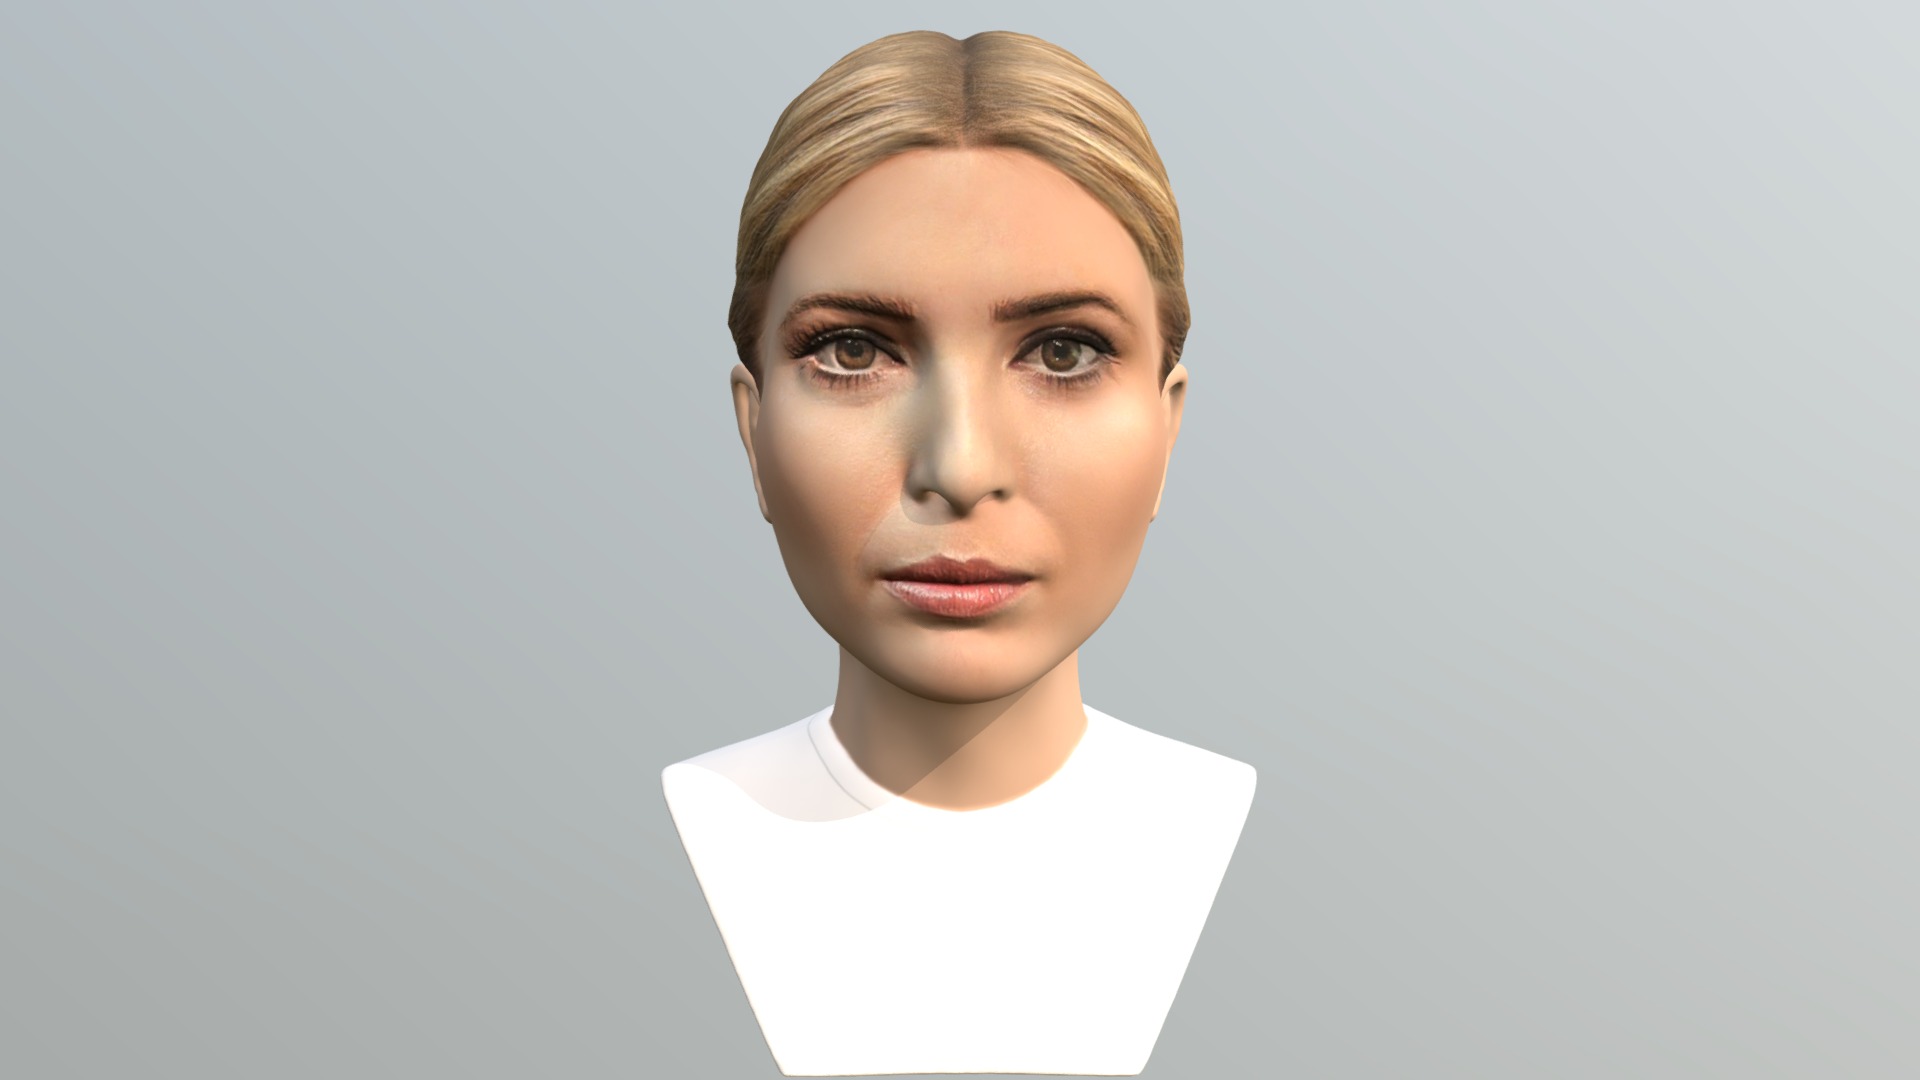 3D model Ivanka Trump bust for full color 3D printing - This is a 3D model of the Ivanka Trump bust for full color 3D printing. The 3D model is about a person with blonde hair.